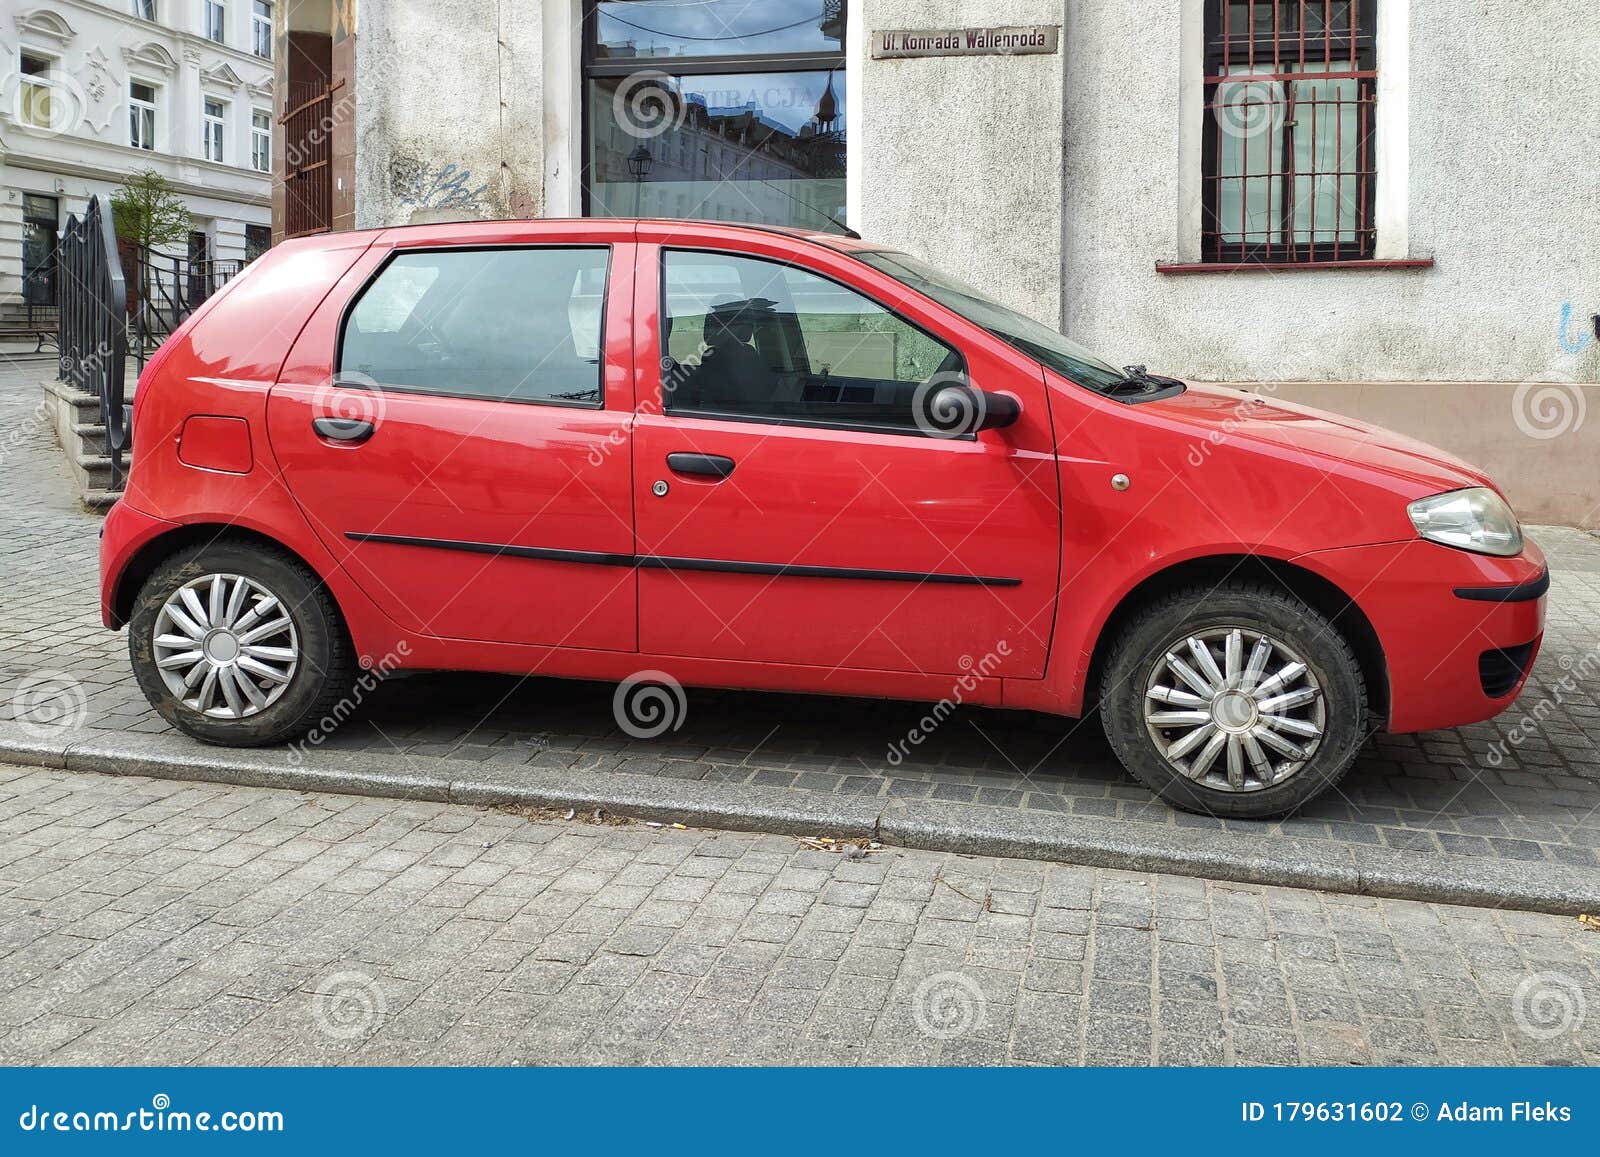 Old Red Fiat Punto Fourdoors Parked Editorial Stock Image - Image